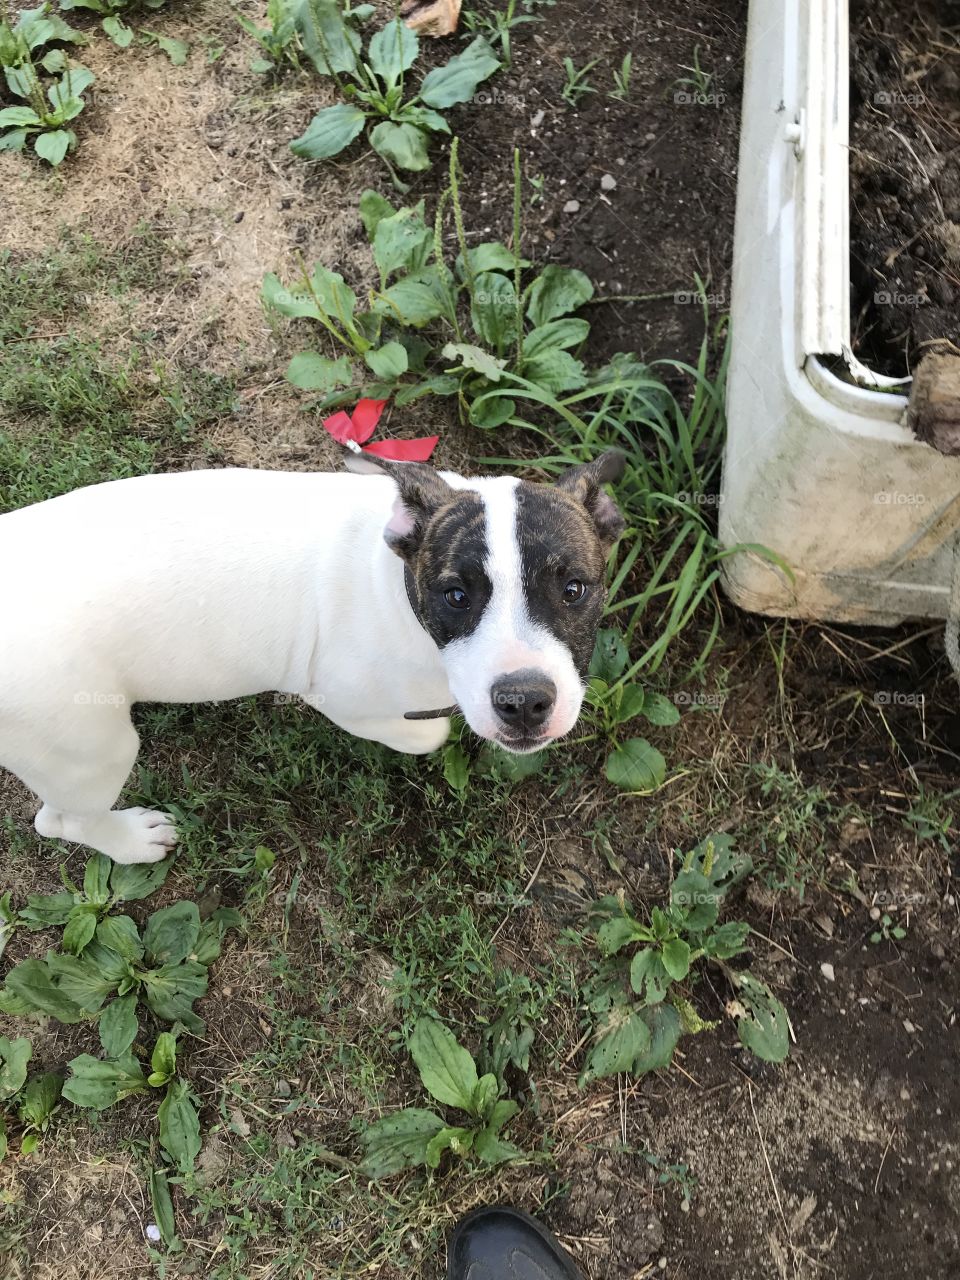 Puppy caught trying to dig in the garden